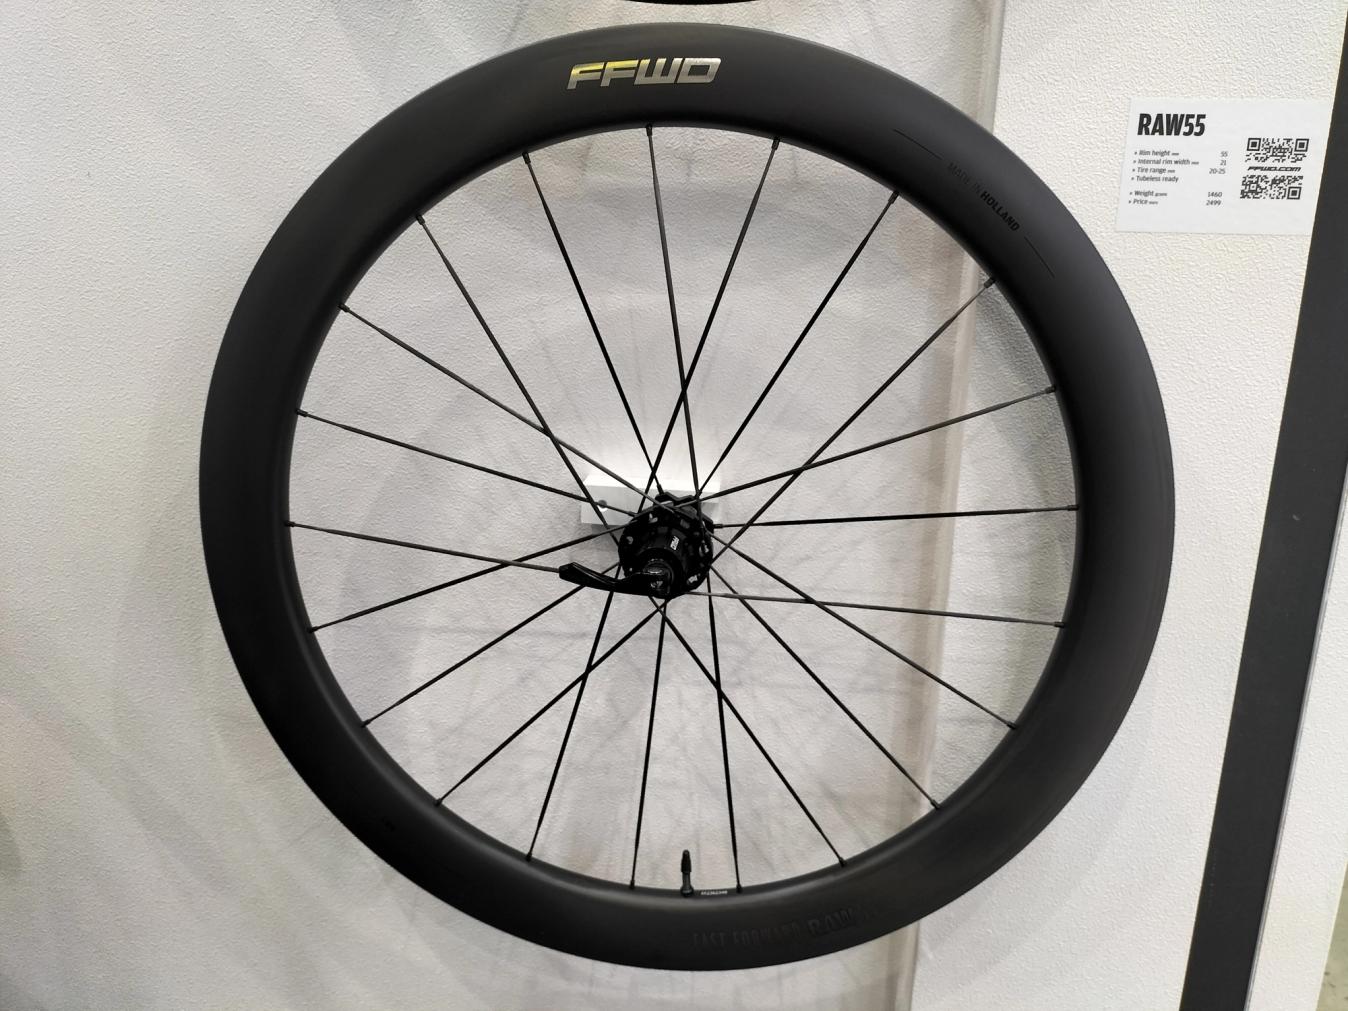 FFWD has stuck to a hooked formula for its latest RAW wheels